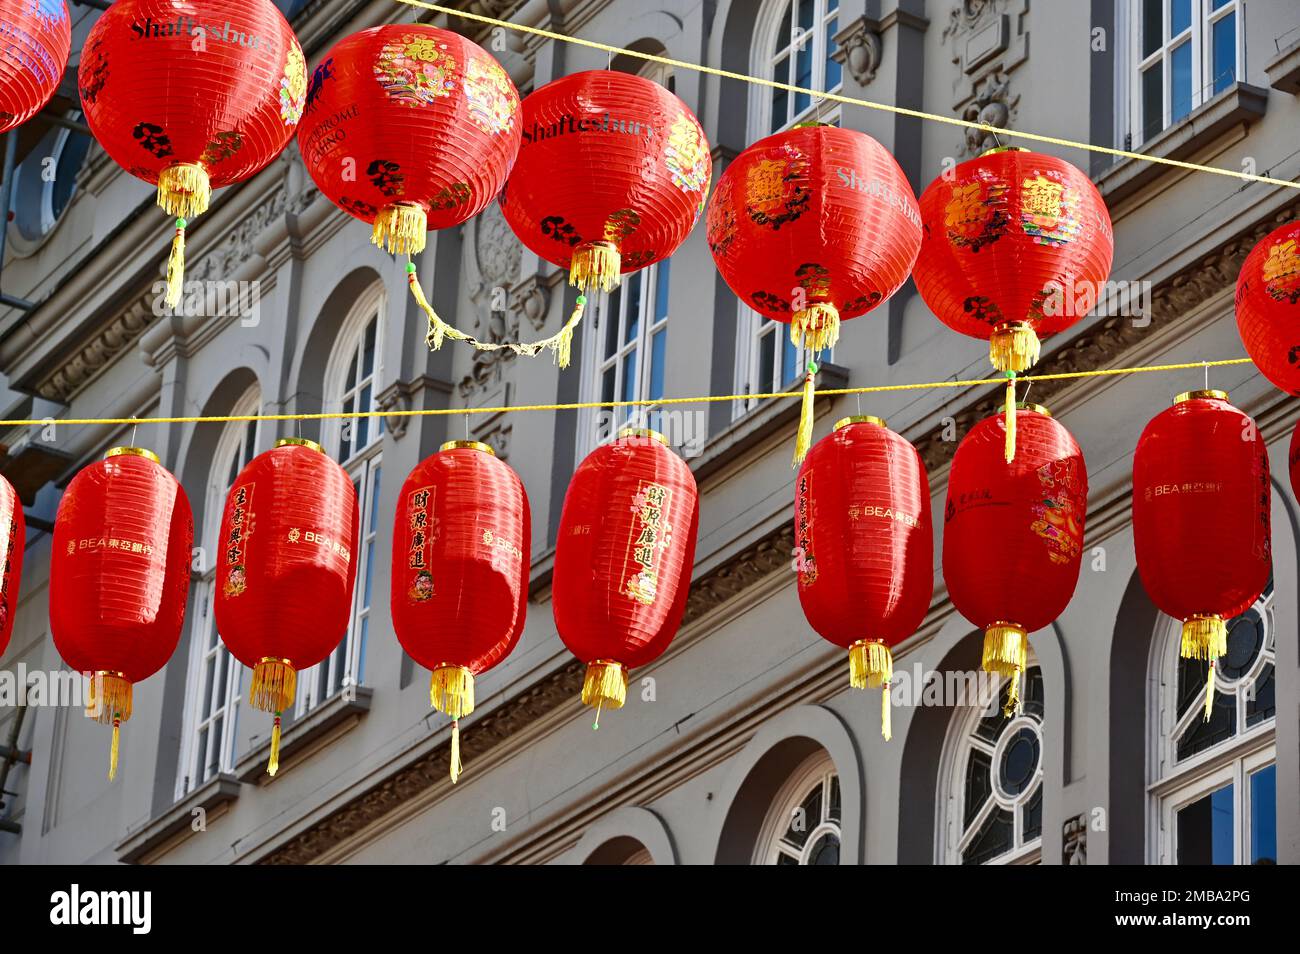 New Red lanterns were hung in Gerrard Street to welcome in the year of the Rabbit. Chinatown, London. UK Stock Photo